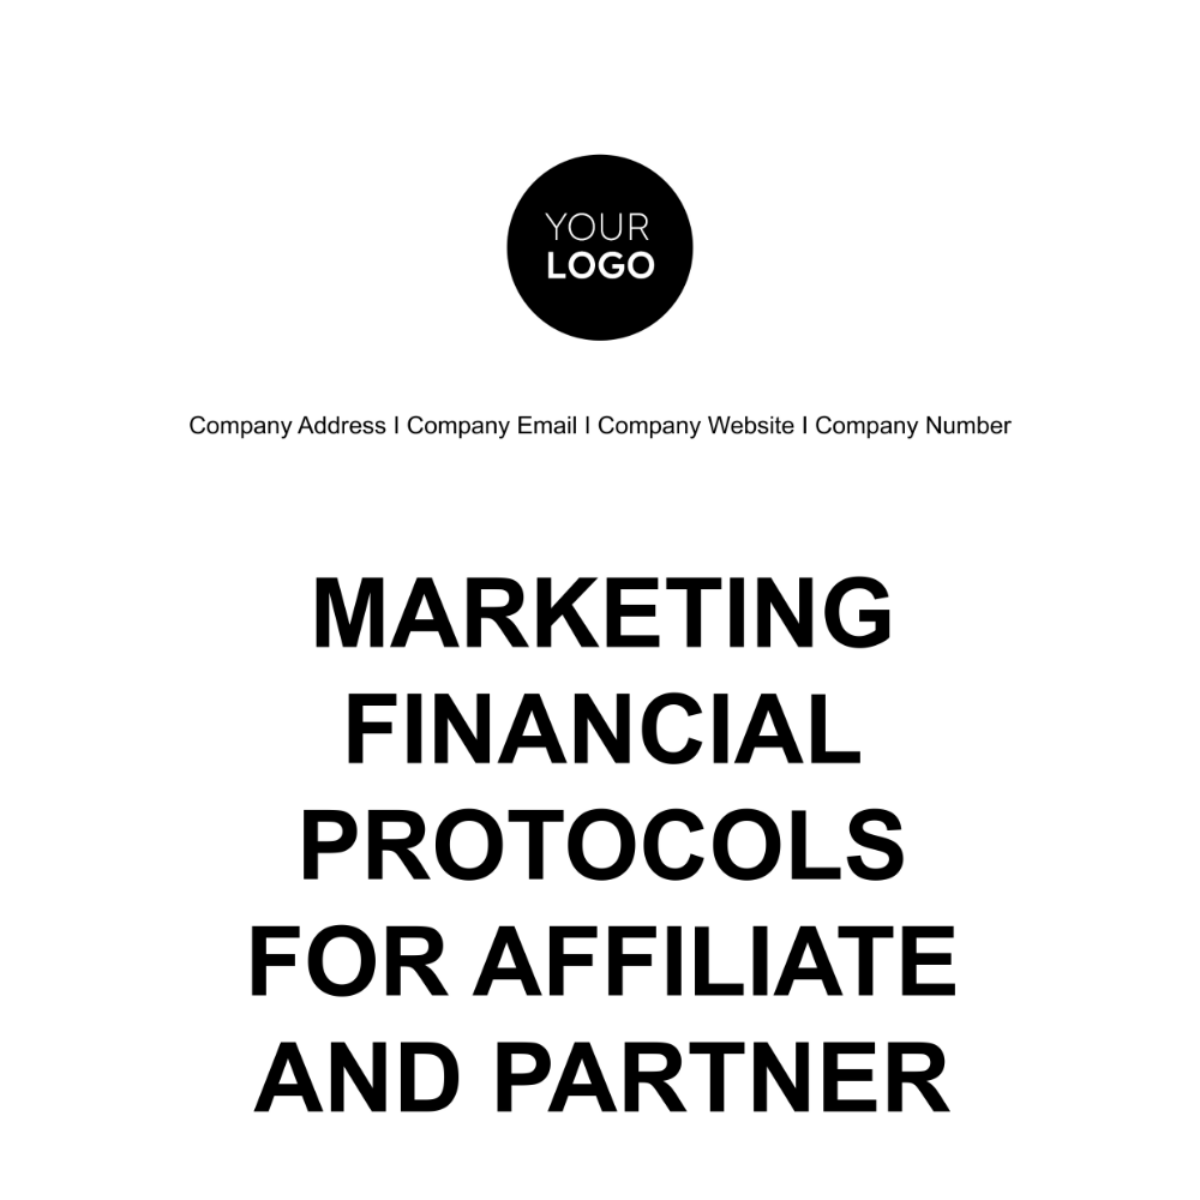 Marketing Financial Protocols for Affiliate and Partner Template